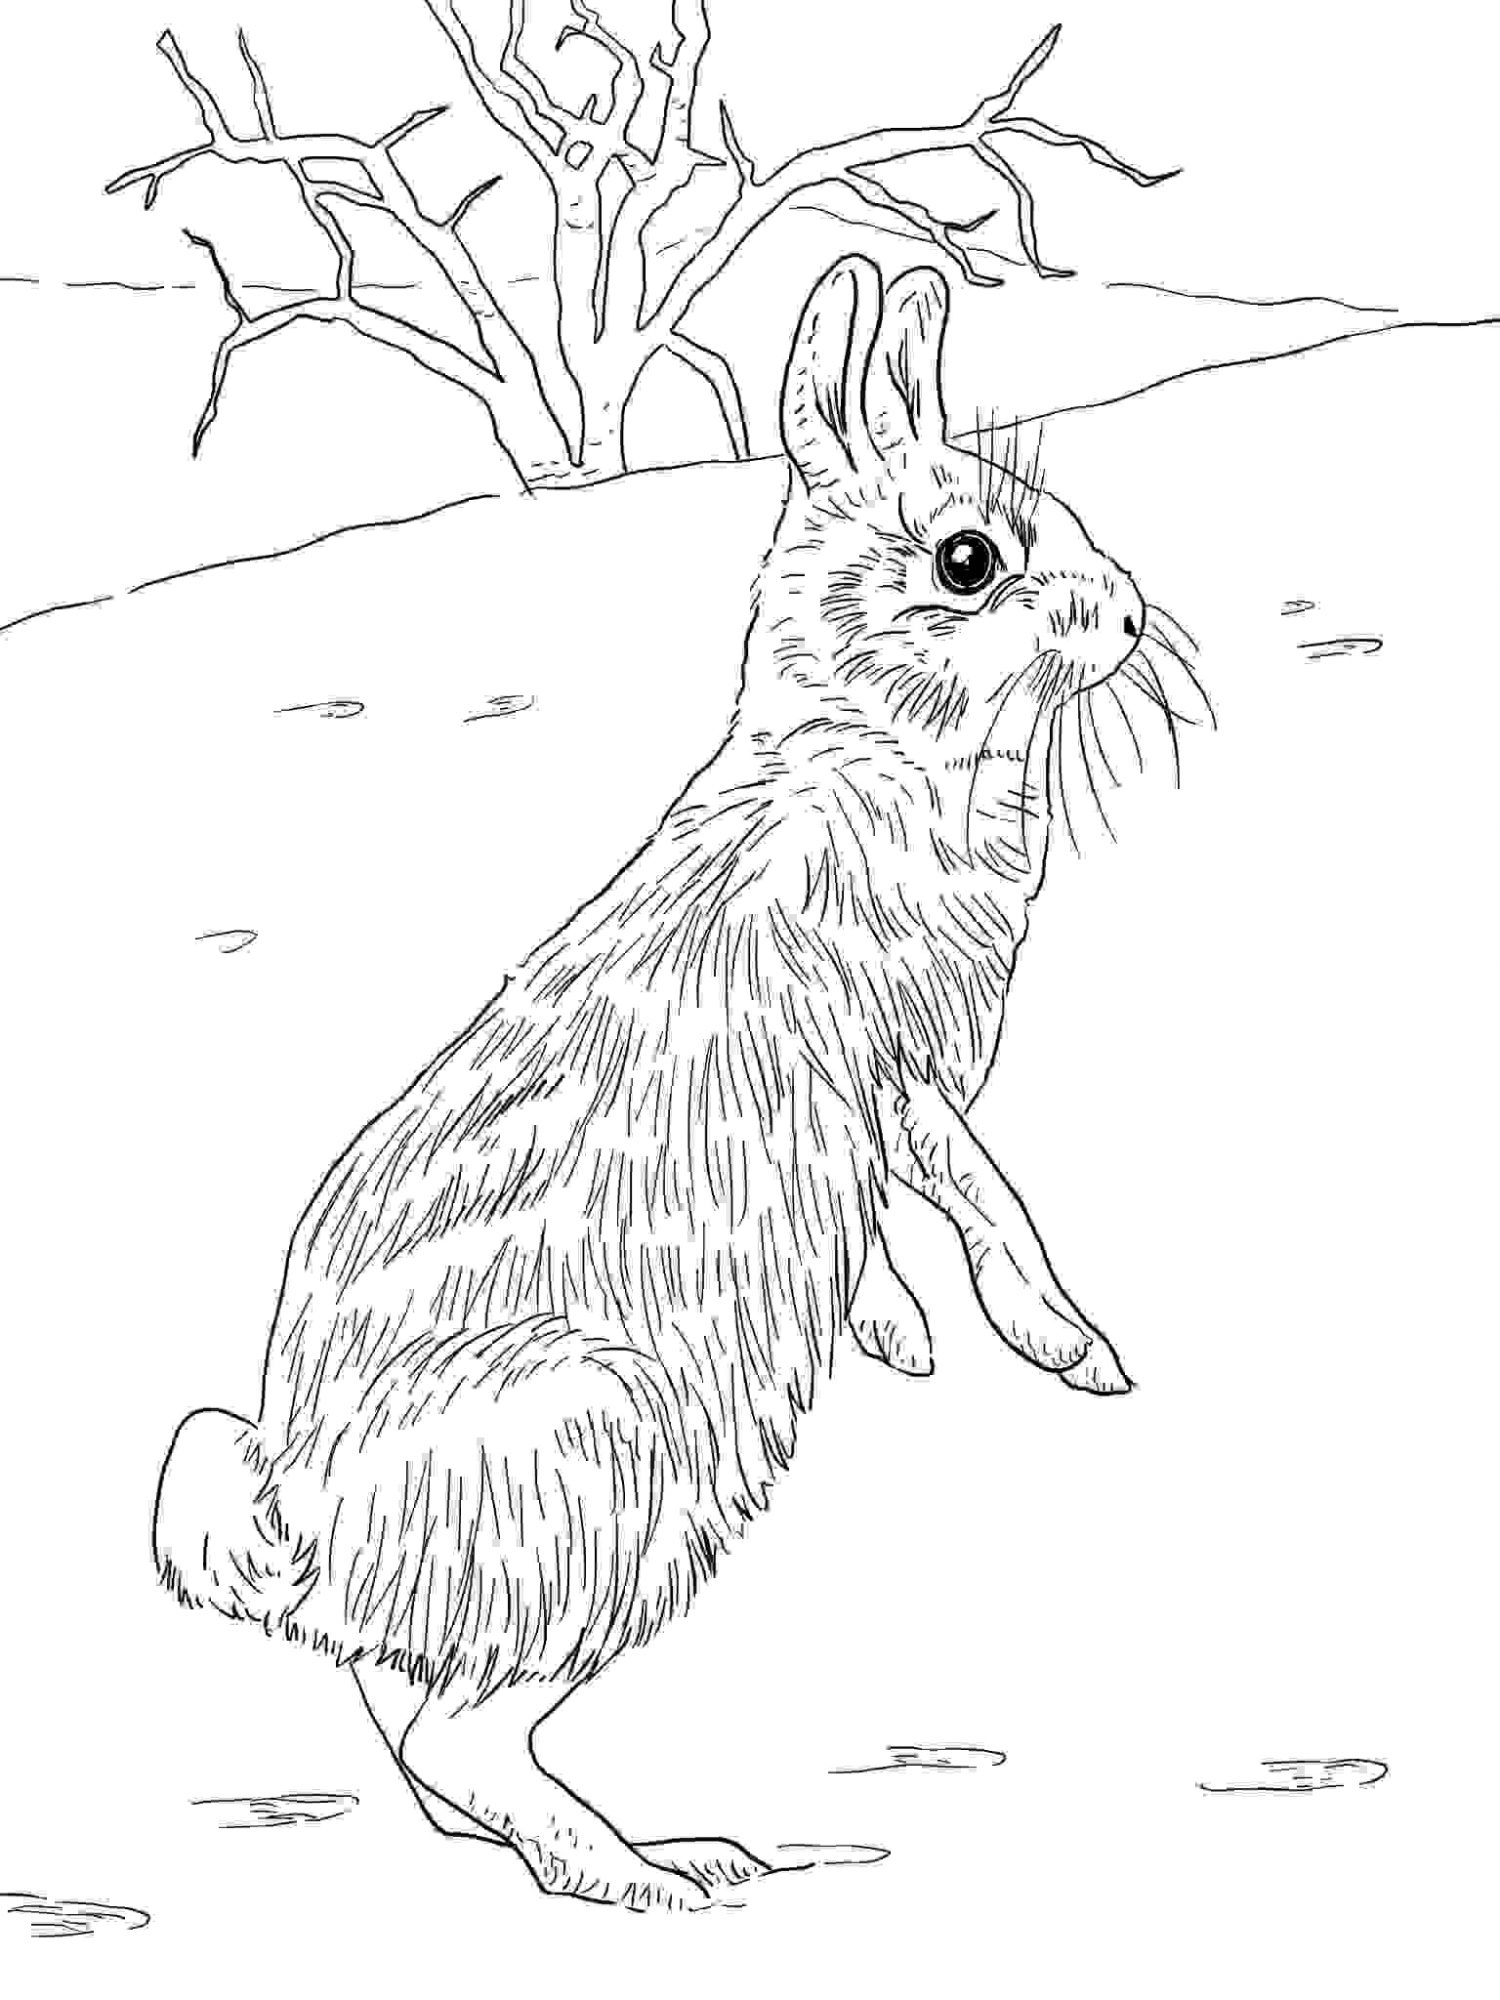 Cottontail rabbit has a distinctive cotton-ball tail from Bunny